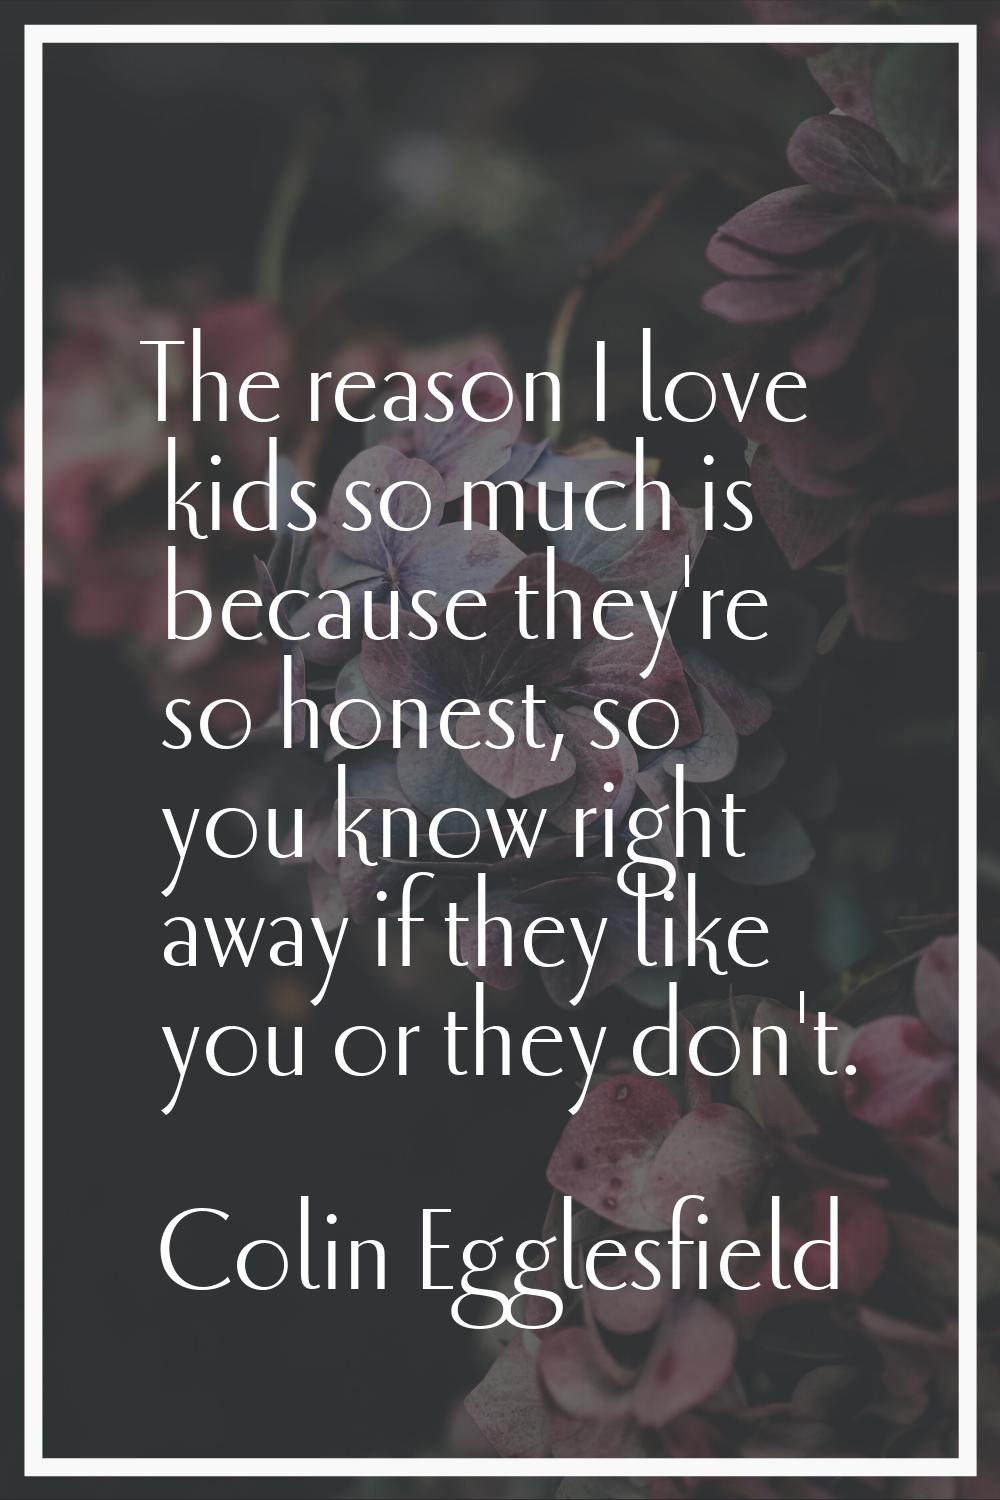 The reason I love kids so much is because they're so honest, so you know right away if they like yo